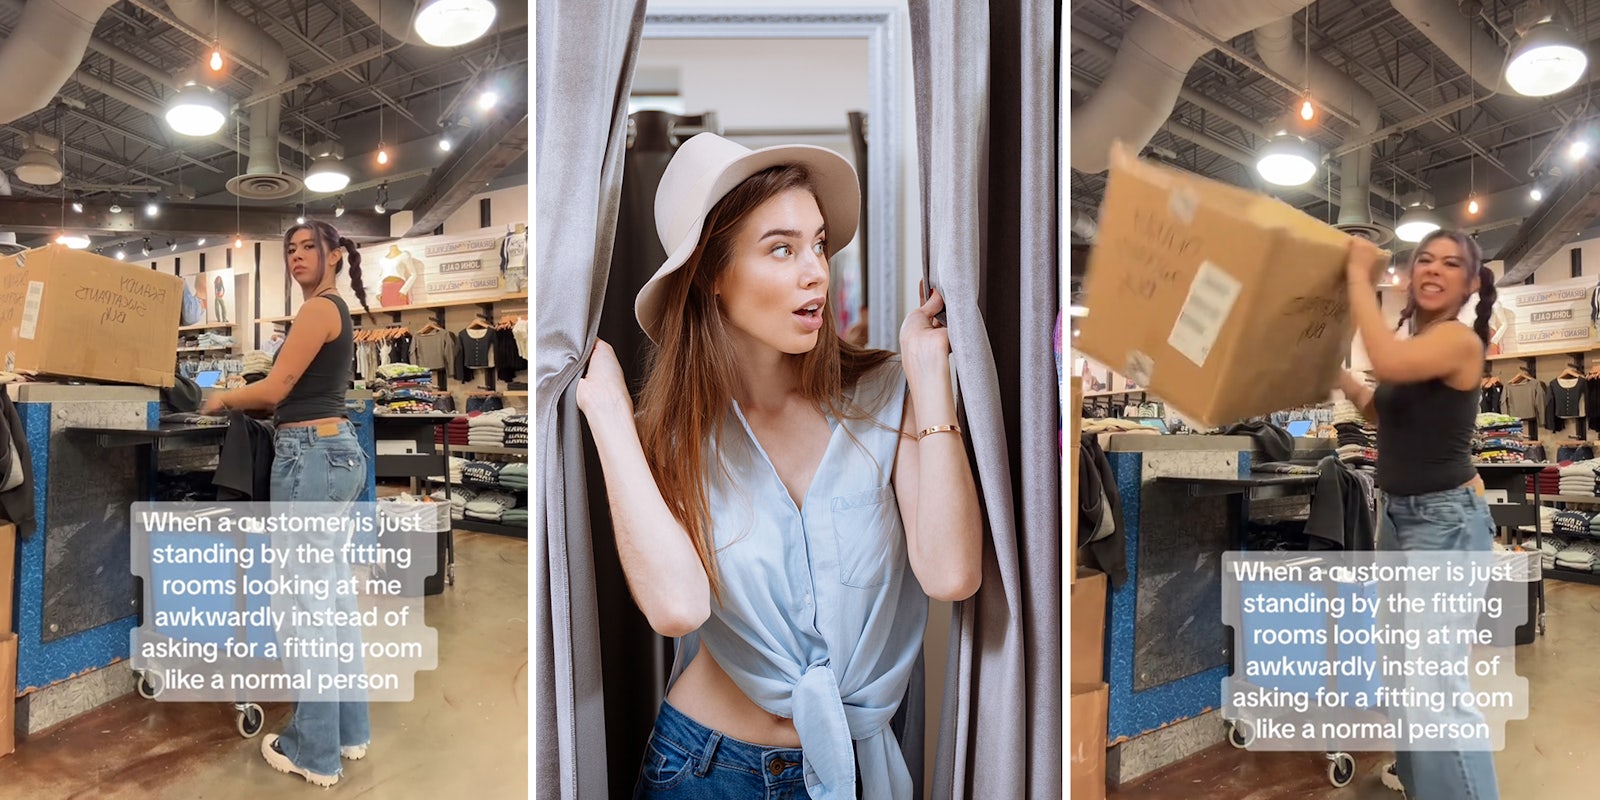 Retail worker mocks customers who wait for dressing rooms instead of asking